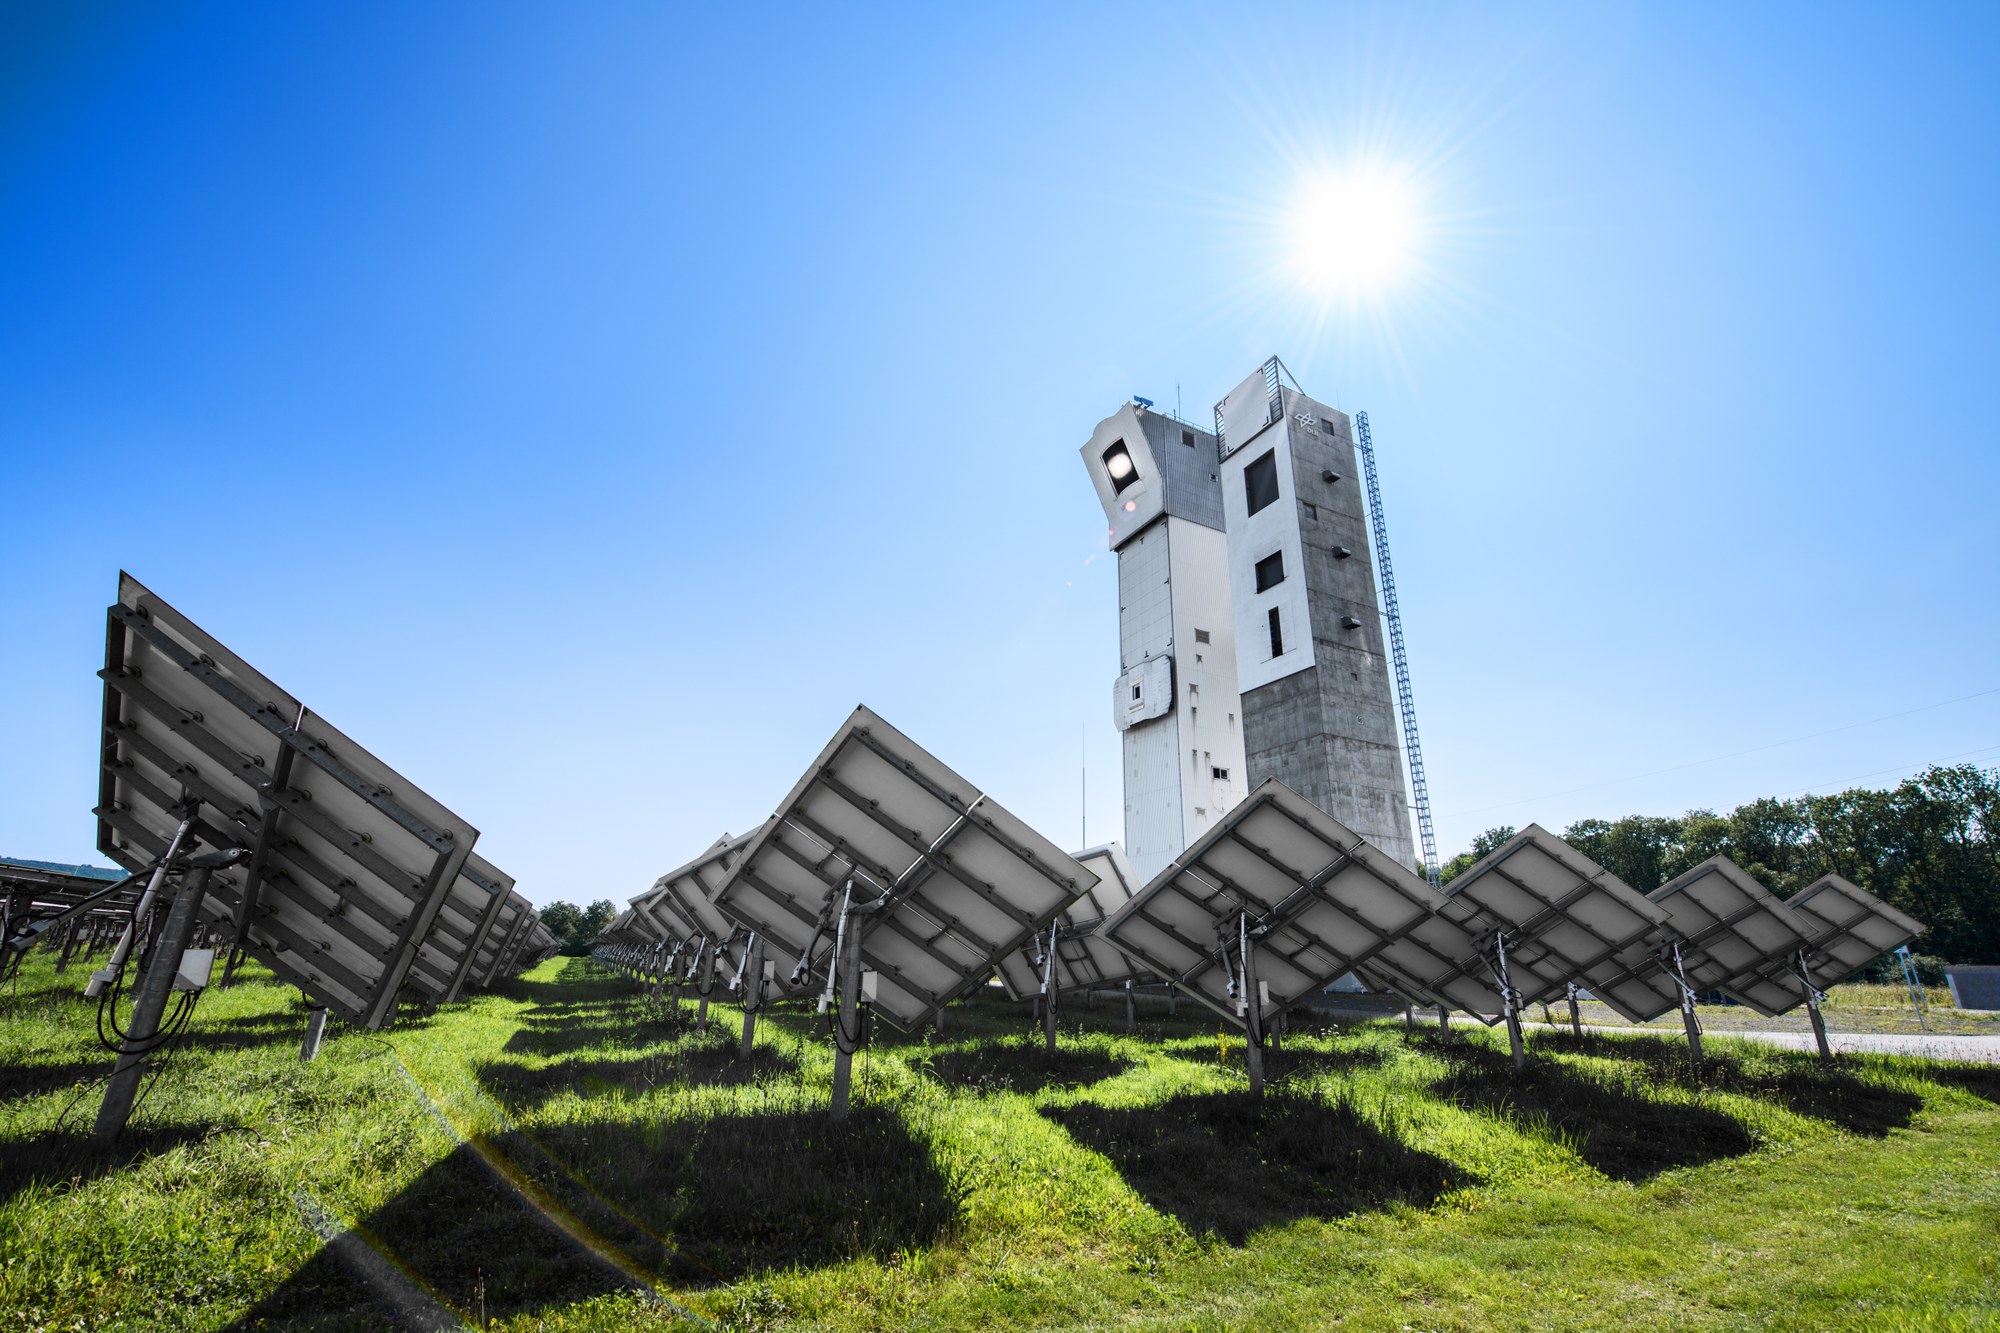 A picture of the solar towers in Jülich with mirrors on a meadow